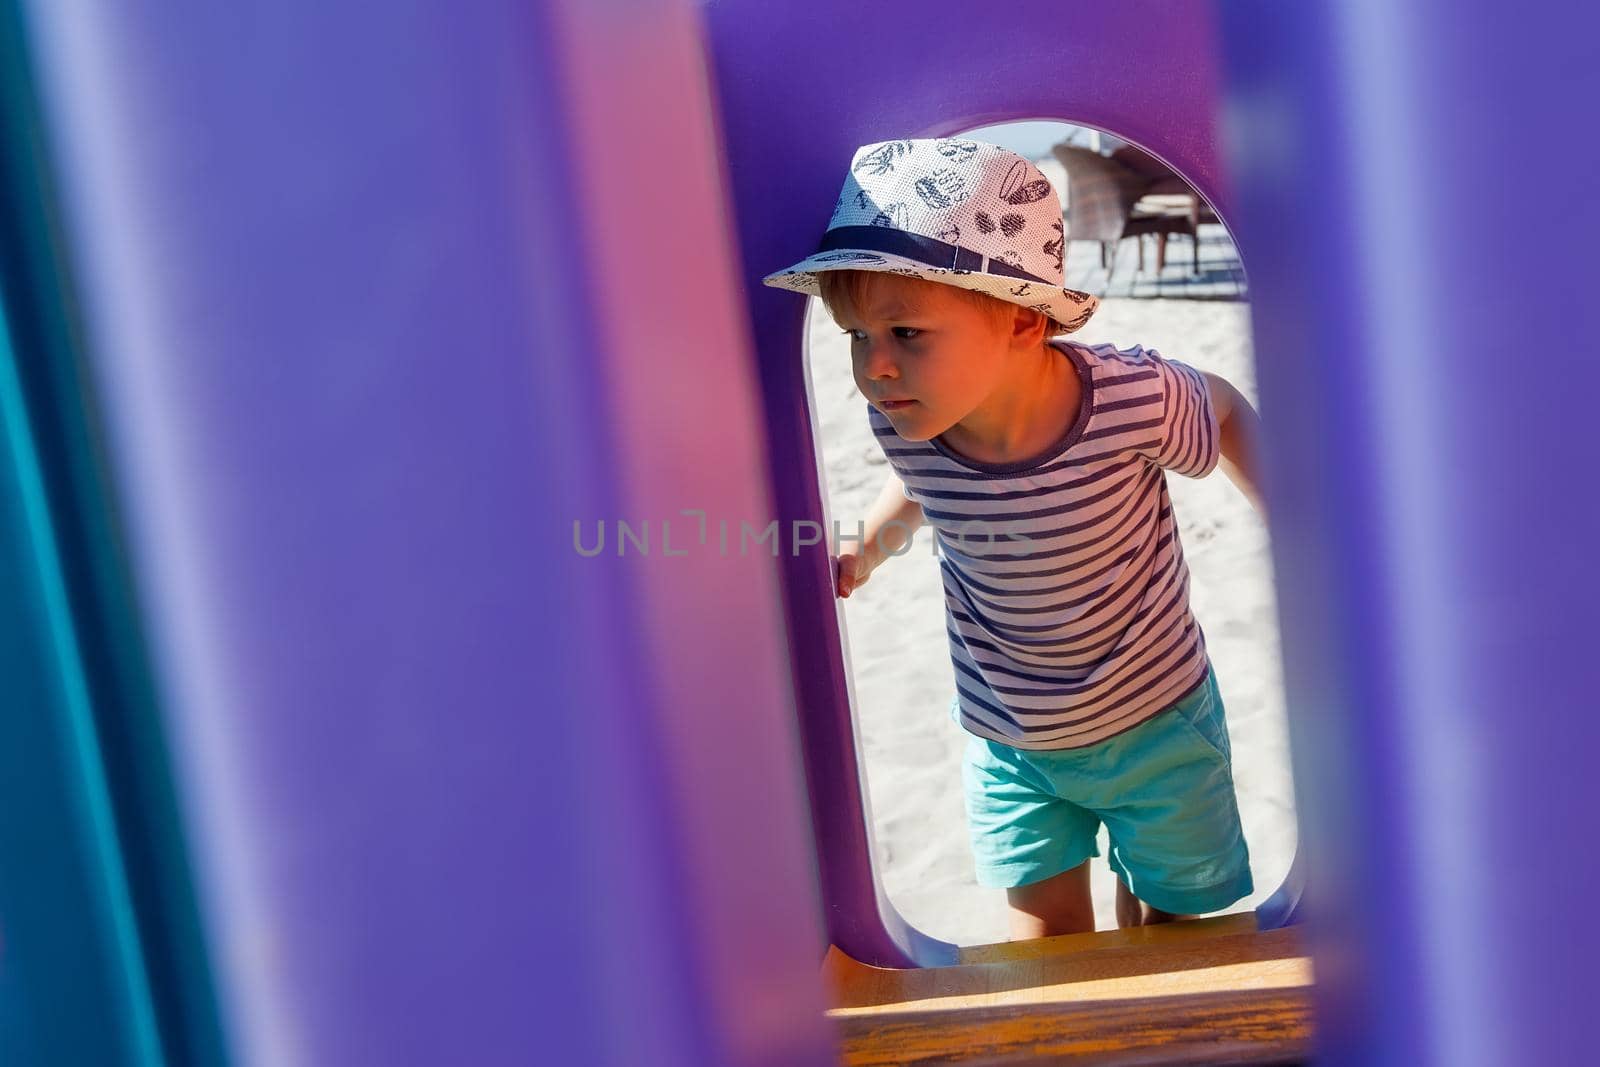 A little boy in a hat looks at the playground through a purple plastic arch. by Lincikas